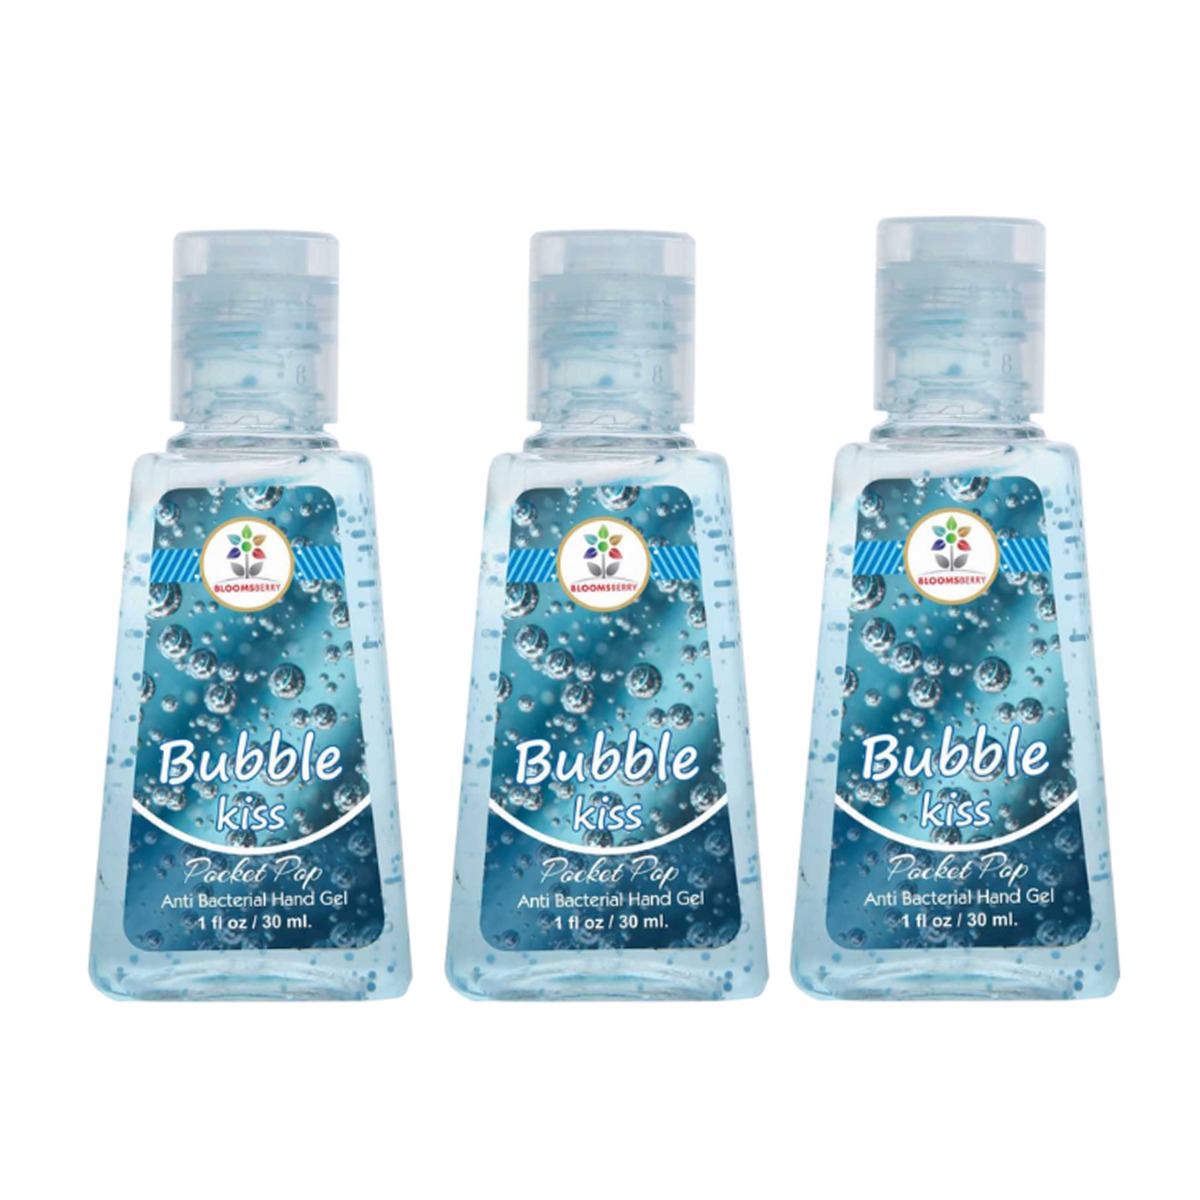 Bloomsberry Bubble Kiss Hand Sanitizer- Pack Of 3, 90ml